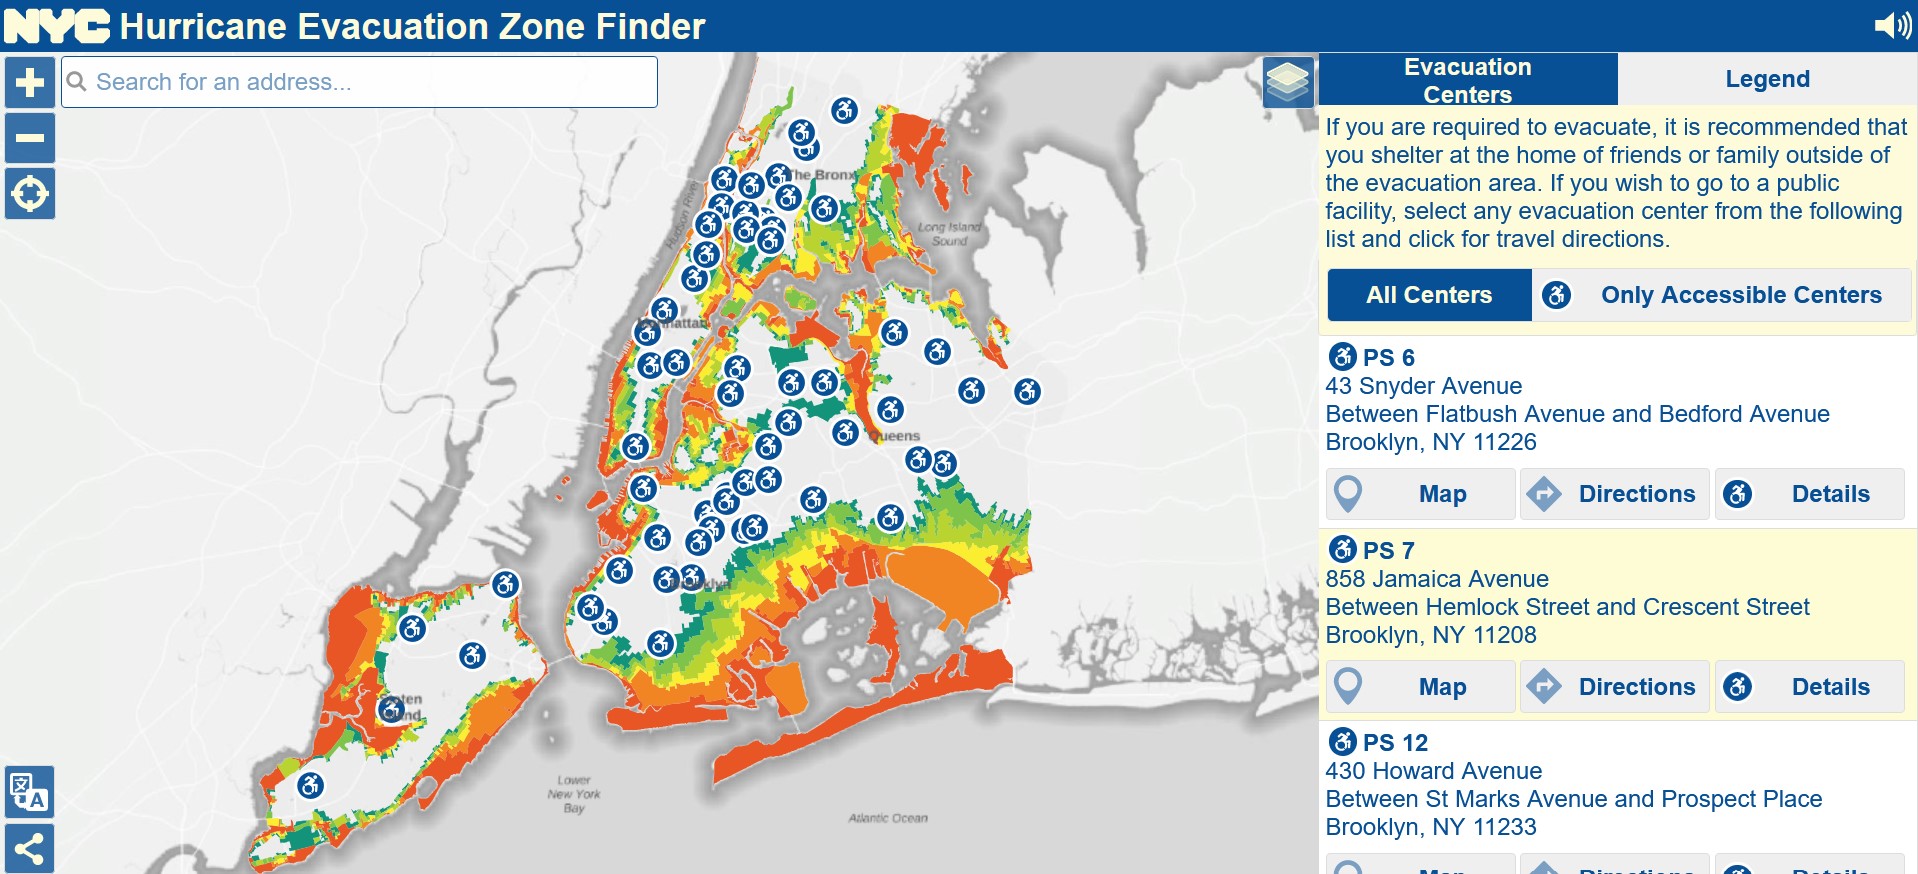 A picture of the NYC hurricane evacuation zone finder page.